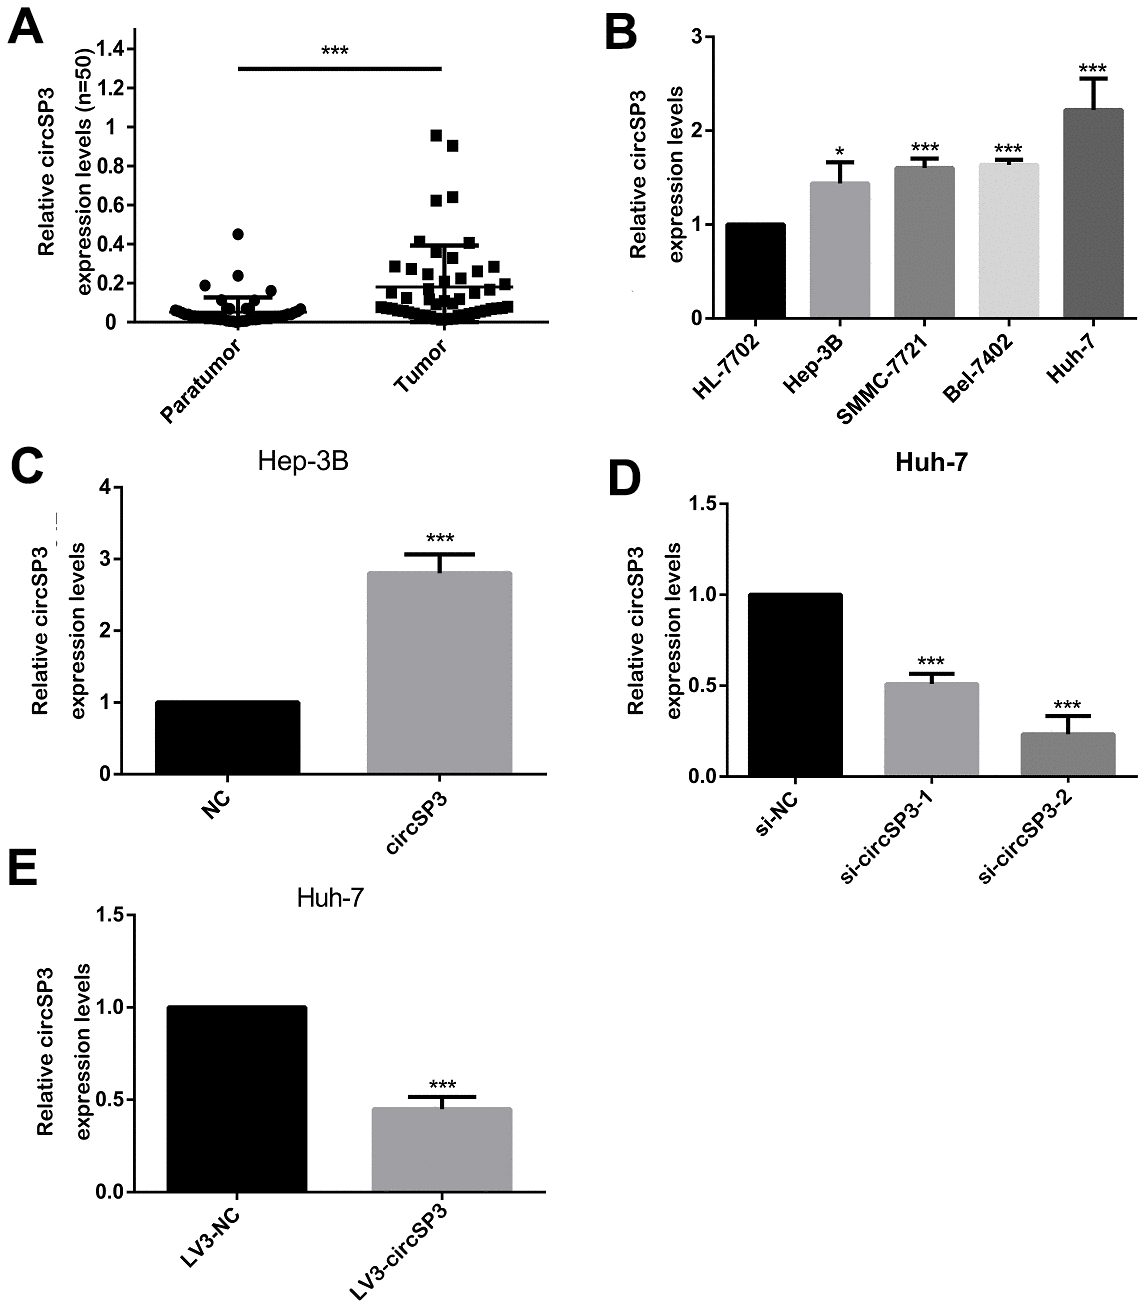 Expression of circSP3 in HCC tissues and cell lines. (A) CircSP3 levels in 48 pairs of HCC tissues and adjacent normal liver tissues were evaluated using qRT-PCR. (B) The relative circSP3 levels in four HCC cell lines (Hep-3B, Huh-7, Bel-7402 and SMMC-7721) and an immortalized liver cell line (HL-77O2) were determined using qRT-PCR. (C) CircSP3 levels in Hep-3B cells infected with NC or circSP3 plasmids. (D) qRT-PCR was conducted to confirm the knockdown efficiency of si-circSP3-1 and si-circSP3-2. (E) qRT-PCR was conducted to confirm the knockdown efficiency of LV3-circSP3. *p